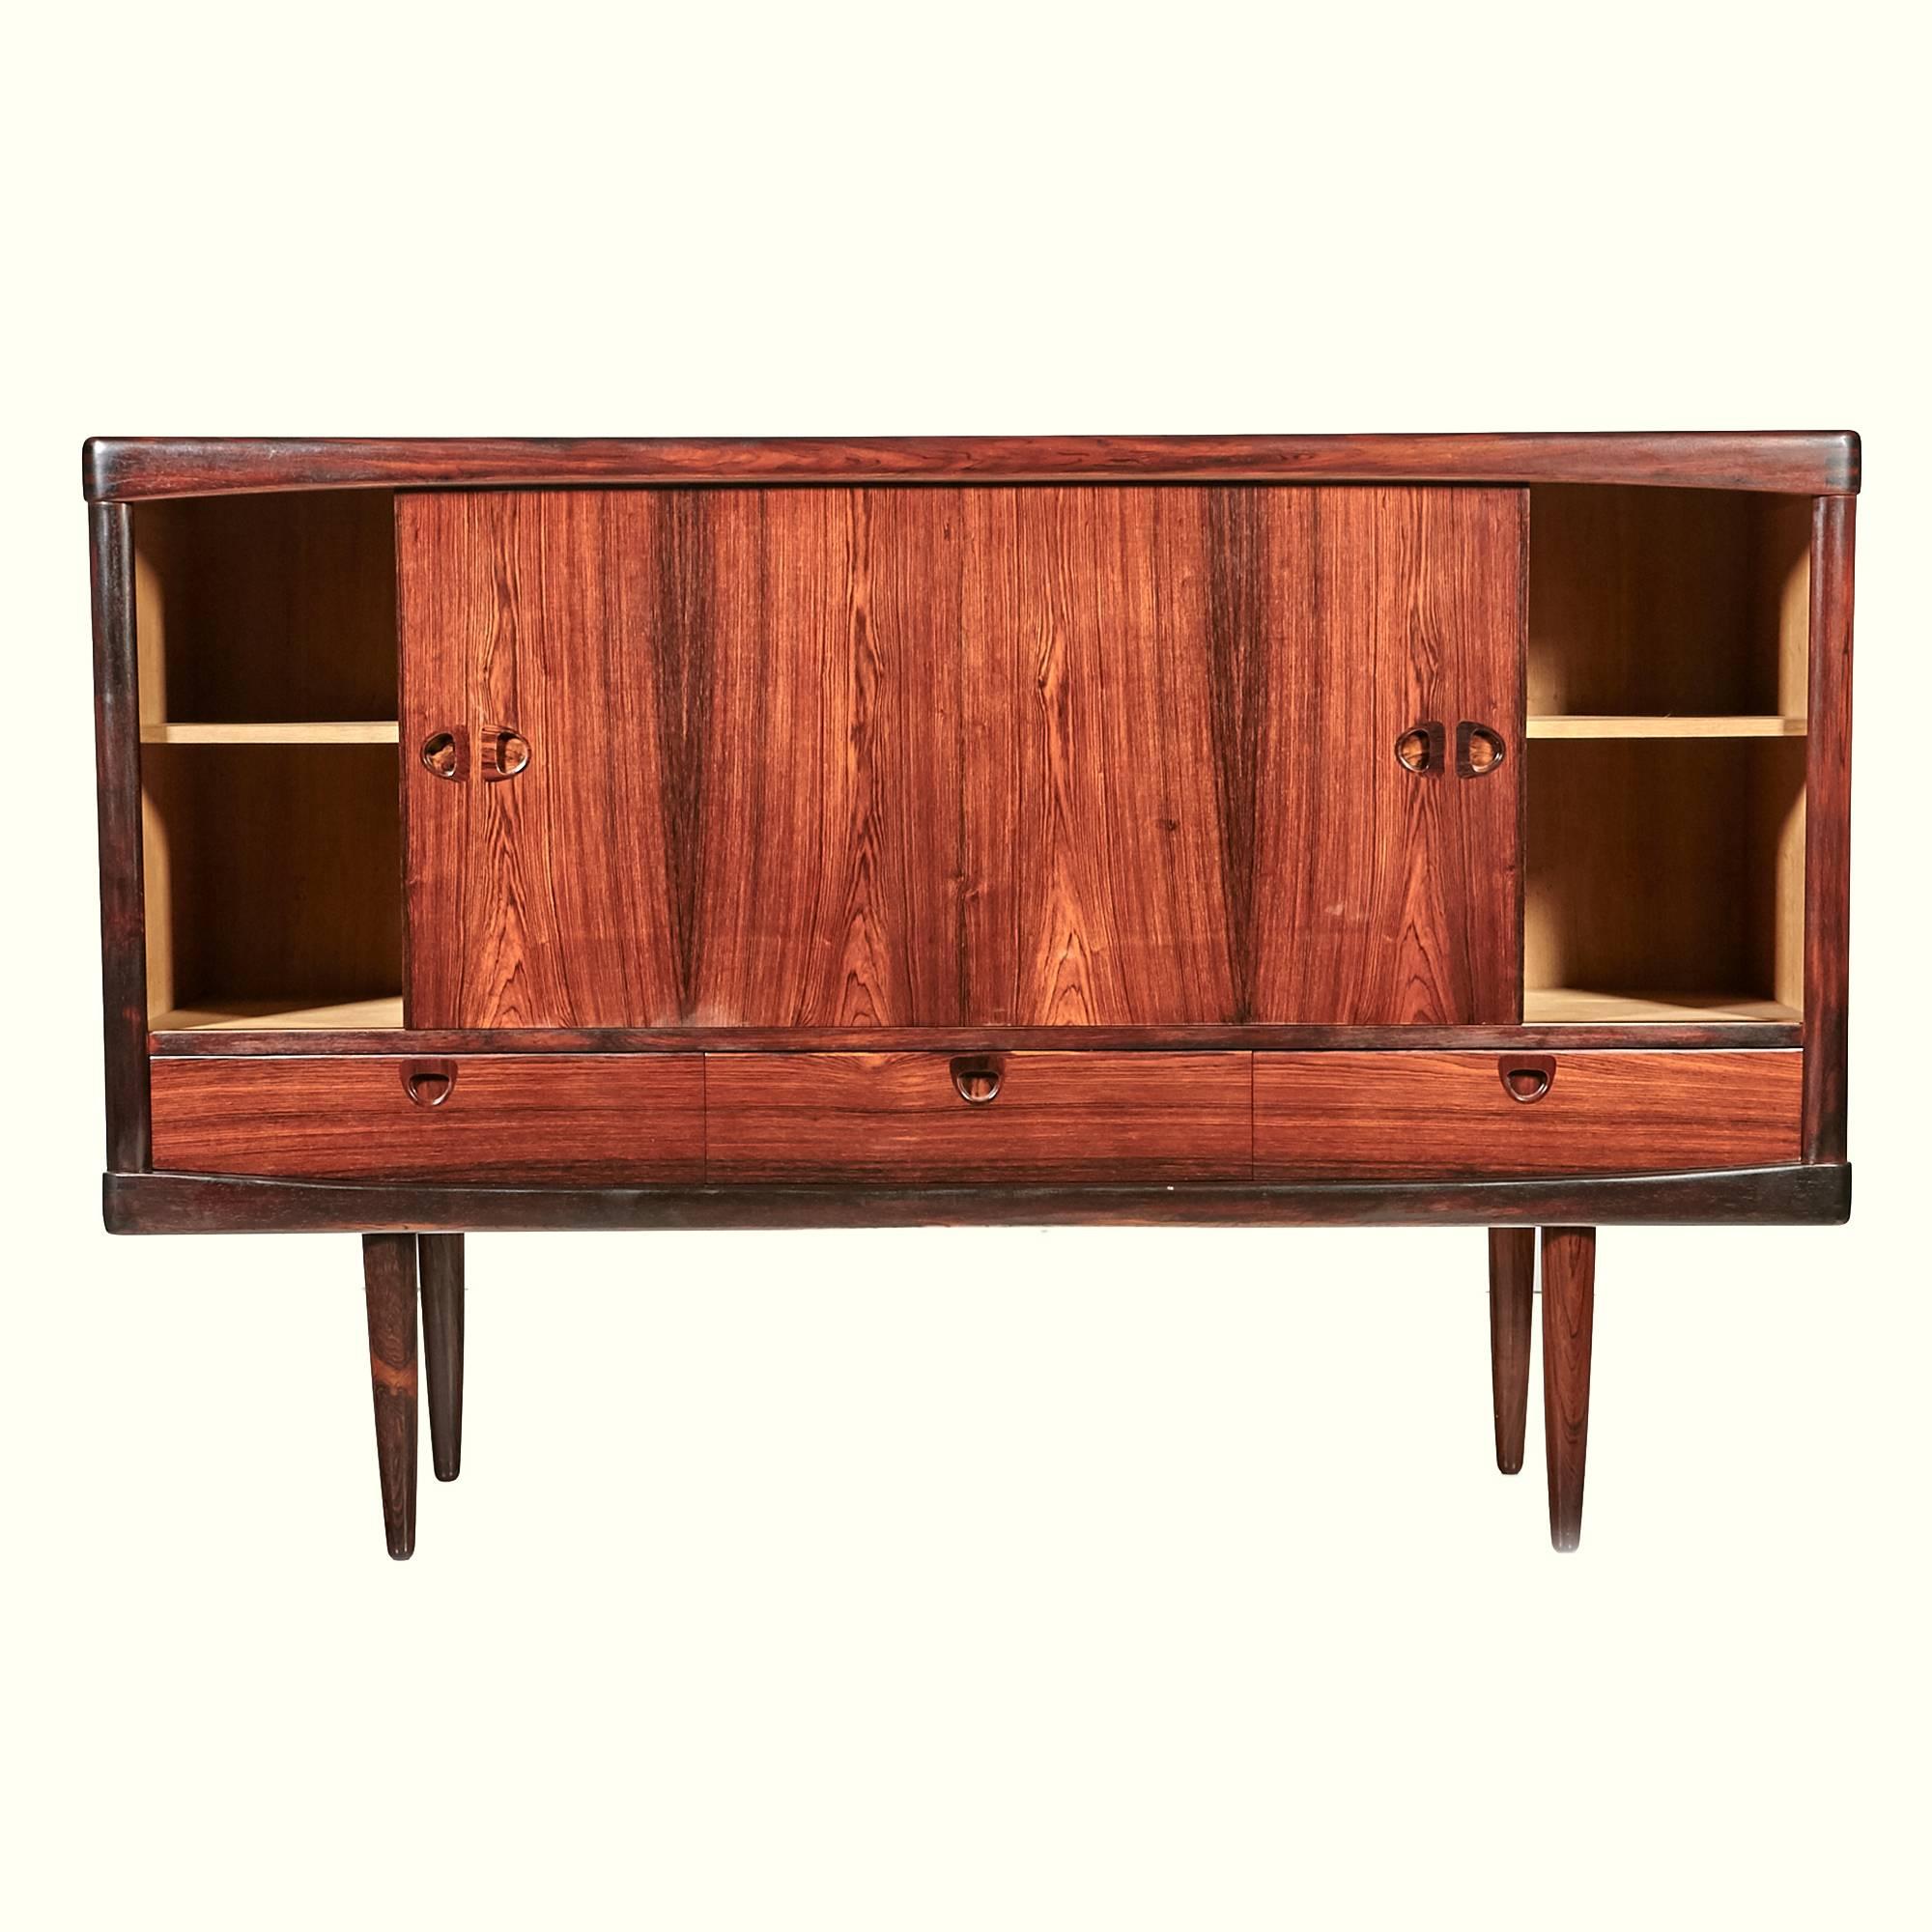 Danish rosewood sideboard credenza designed by H.W. Klein for Bramin of Denmark. The sideboard has sliding front doors with shelving storage behind them and three additional drawers. Finished rosewood backing and exposed dovetail accents.